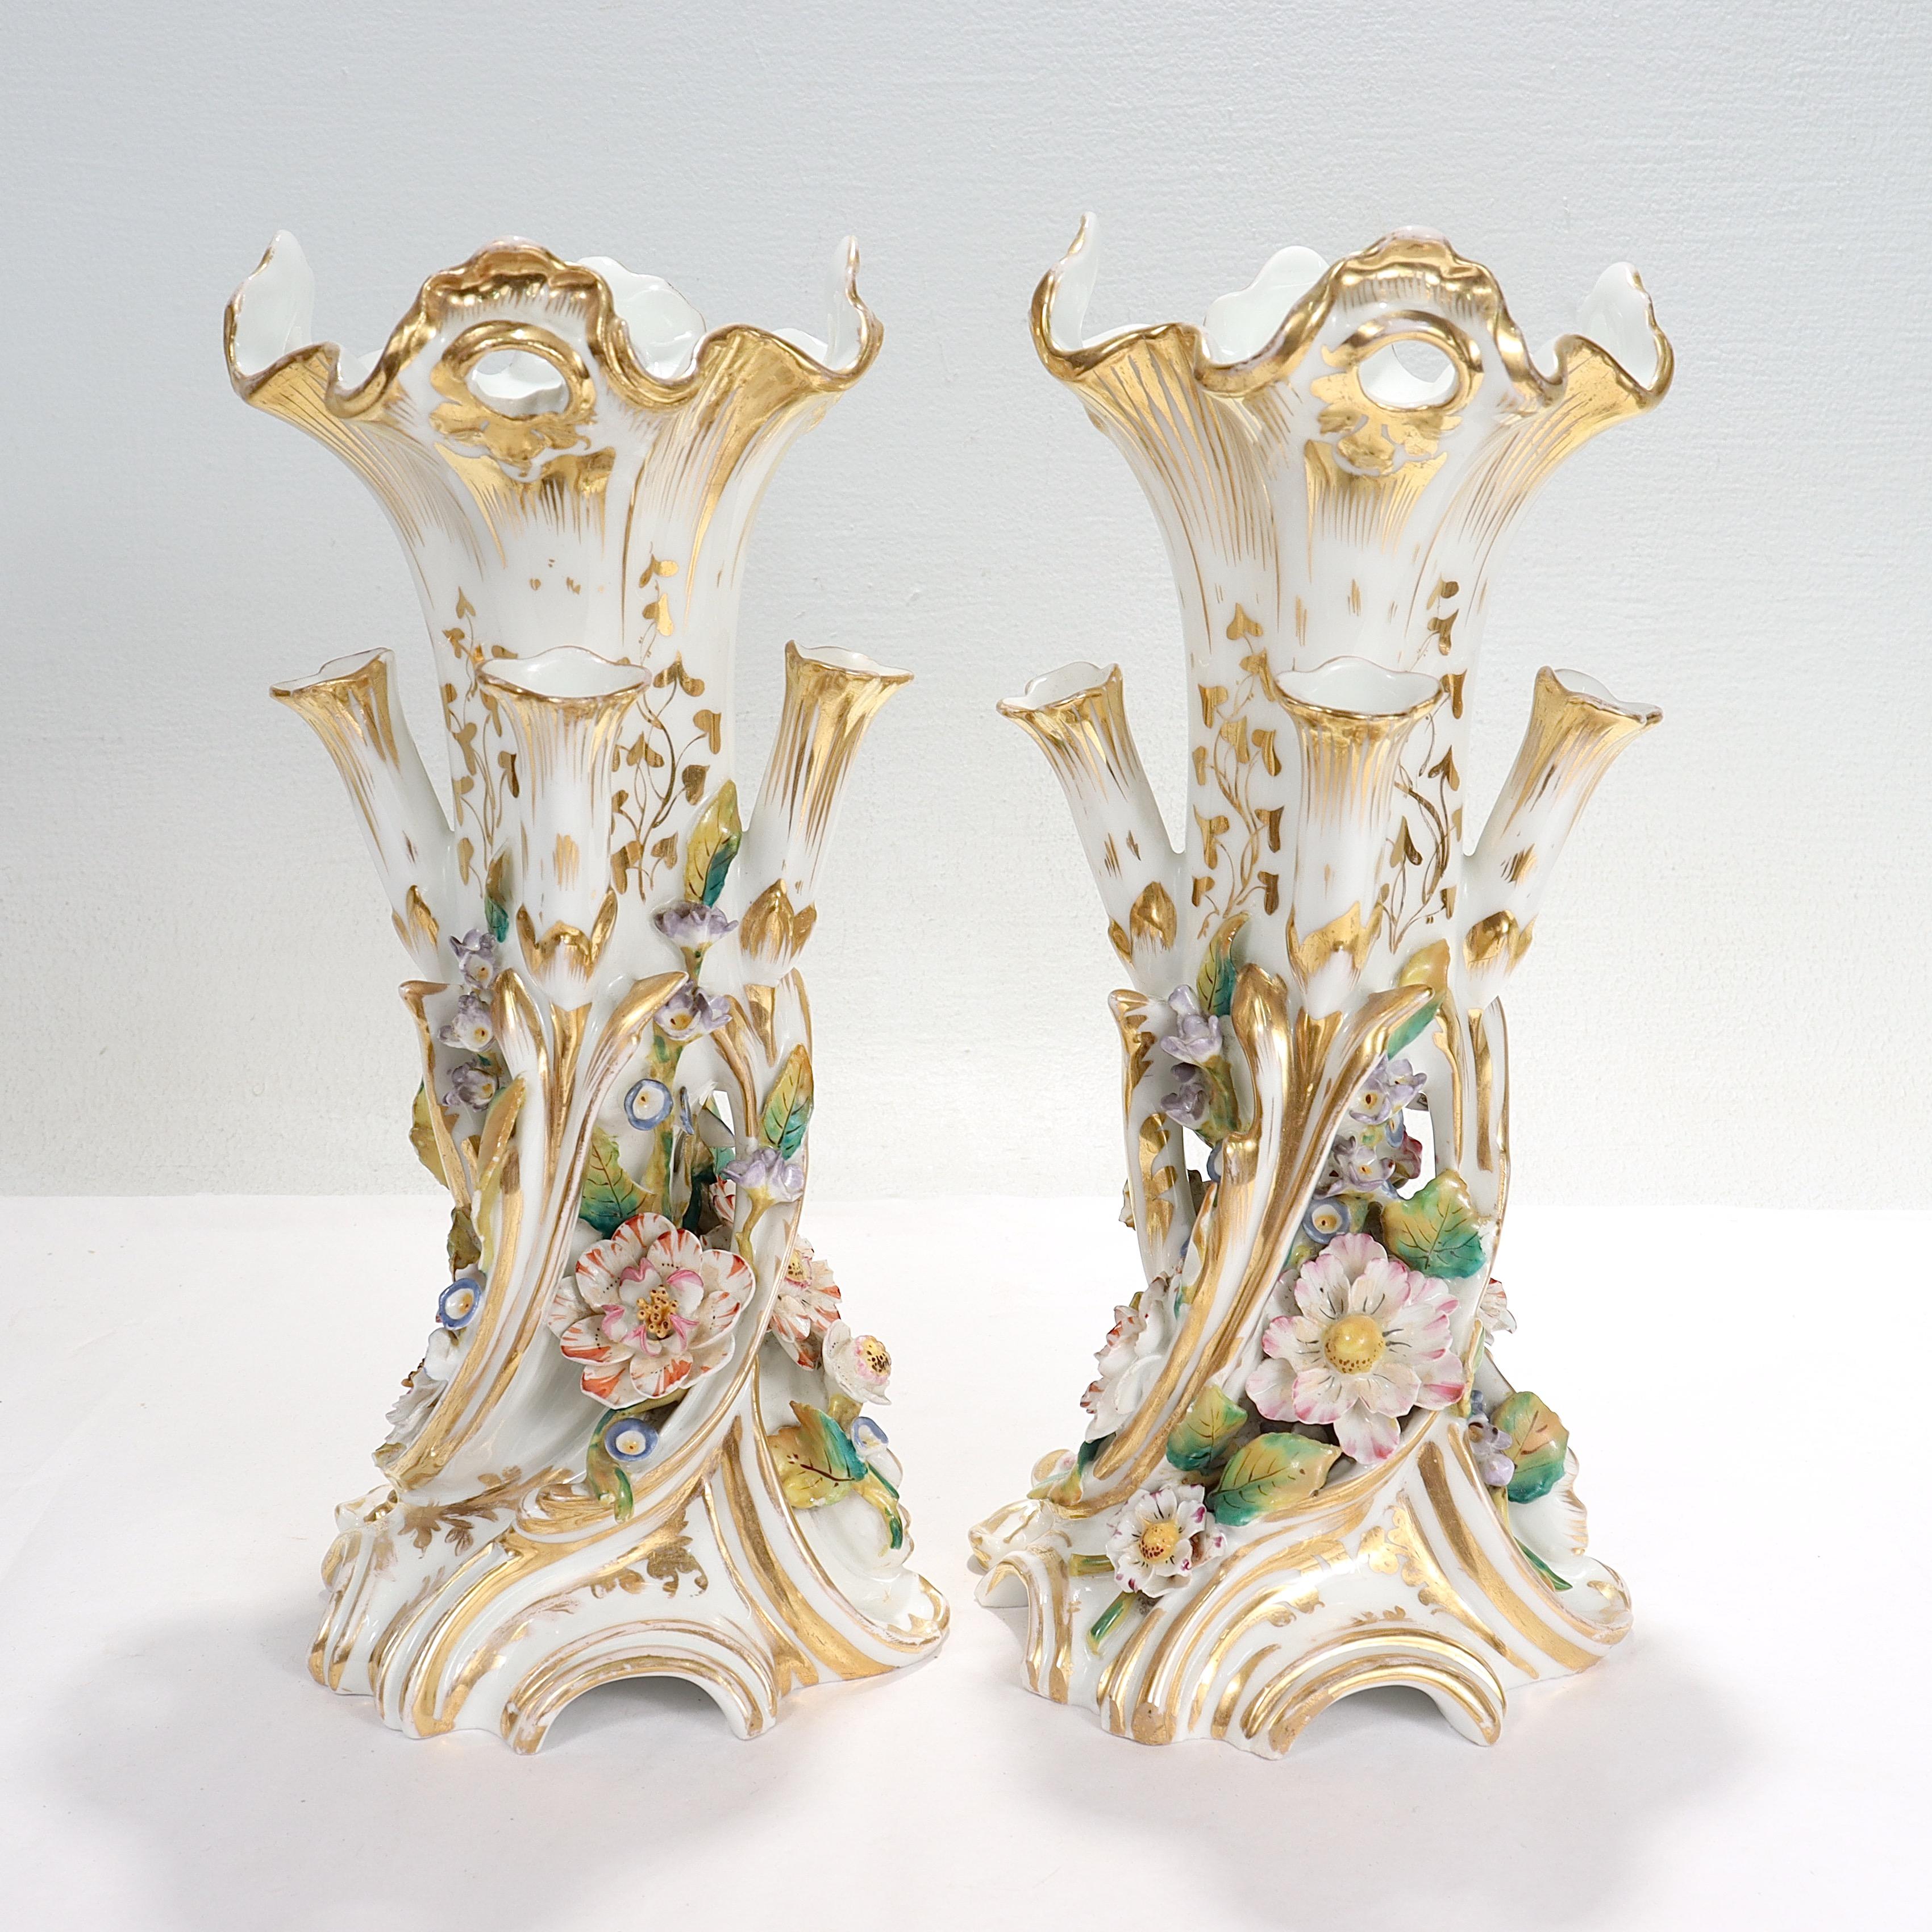 A fine pair of antique porcelain flower vases.

In the style of Jacob Petit.

Each with a large central vase surrounded by 4 smaller, integral bud vases.

With extensive gilding and floral decoration throughout.

Simply a great pair of antique